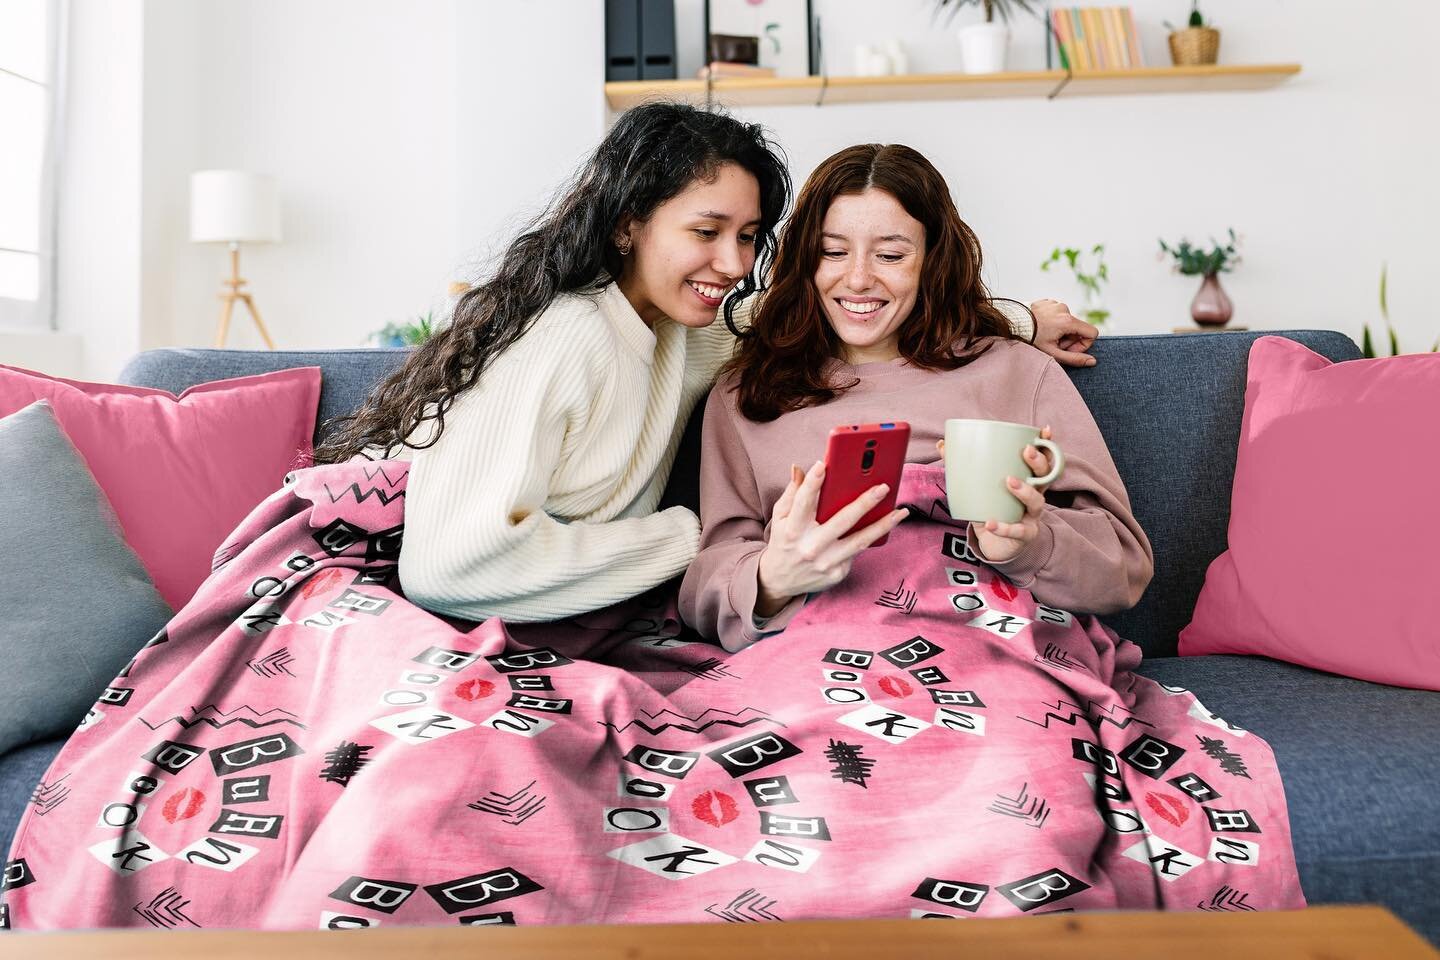 On Wednesdays, we go to the theaters to see Mean Girls 💋

We&rsquo;re channeling out inner plastic with our viral Burn Book Blanket available at @homegoods @tjmaxx and @marshalls 

#meangirls #reneerapp #jayfranco #homedecor